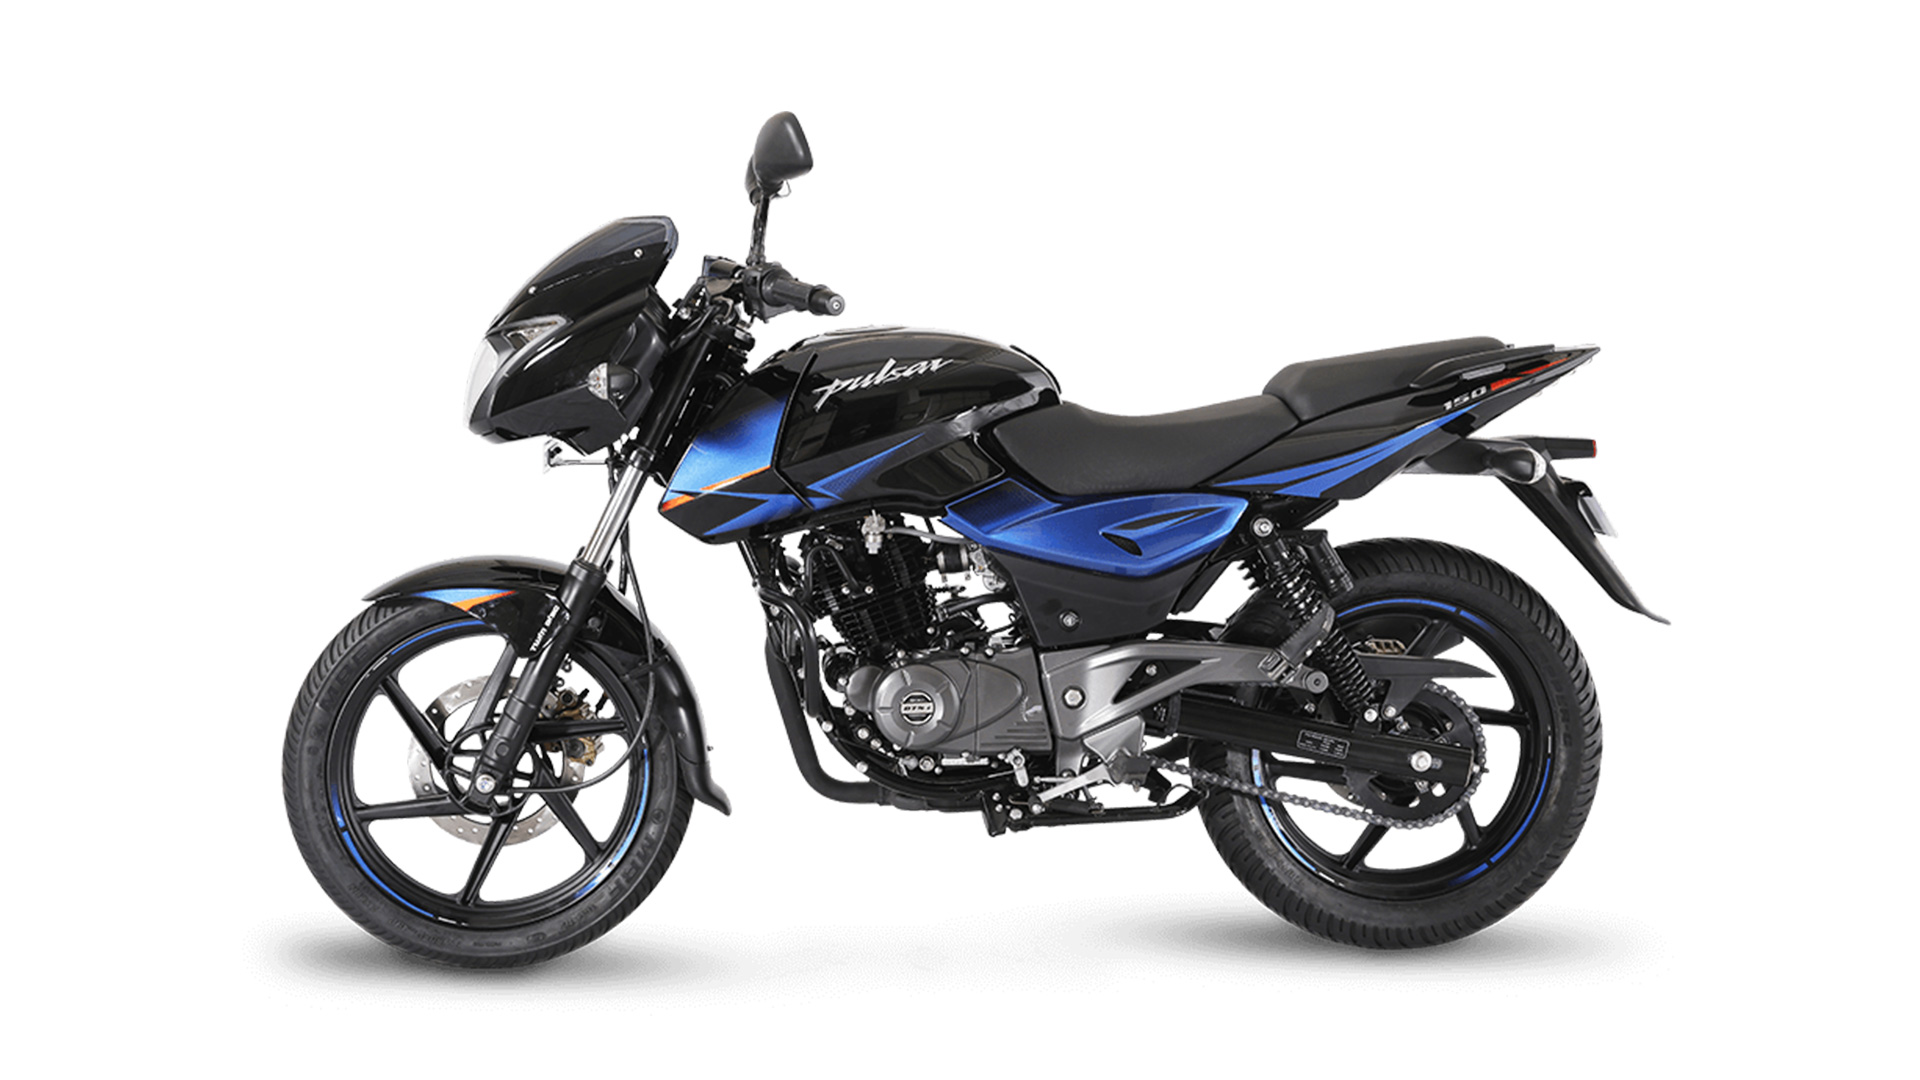 Bajaj Pulsar 150 Twin Disc Launched In Nepal At Npr 2 56 Lakh